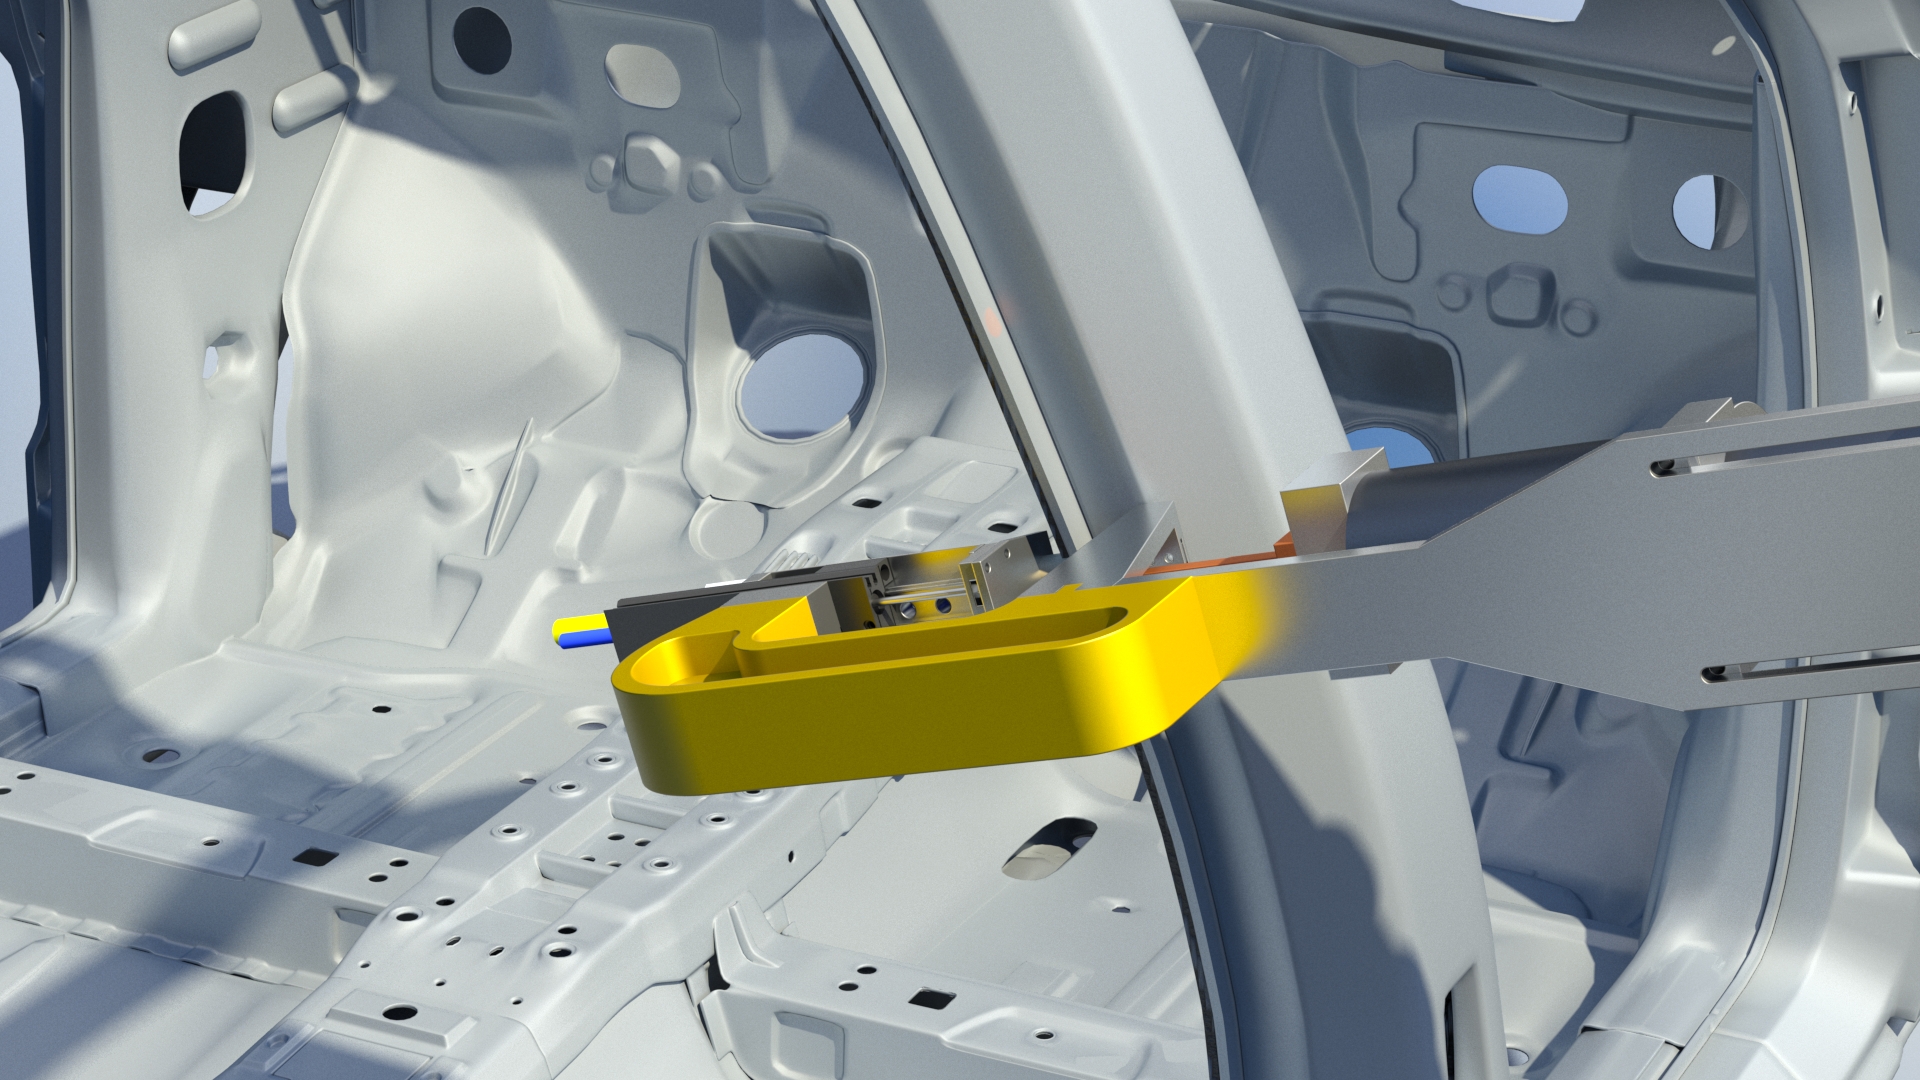 The HPCI technology is used to integrate composite parts to metallic car body structures.  